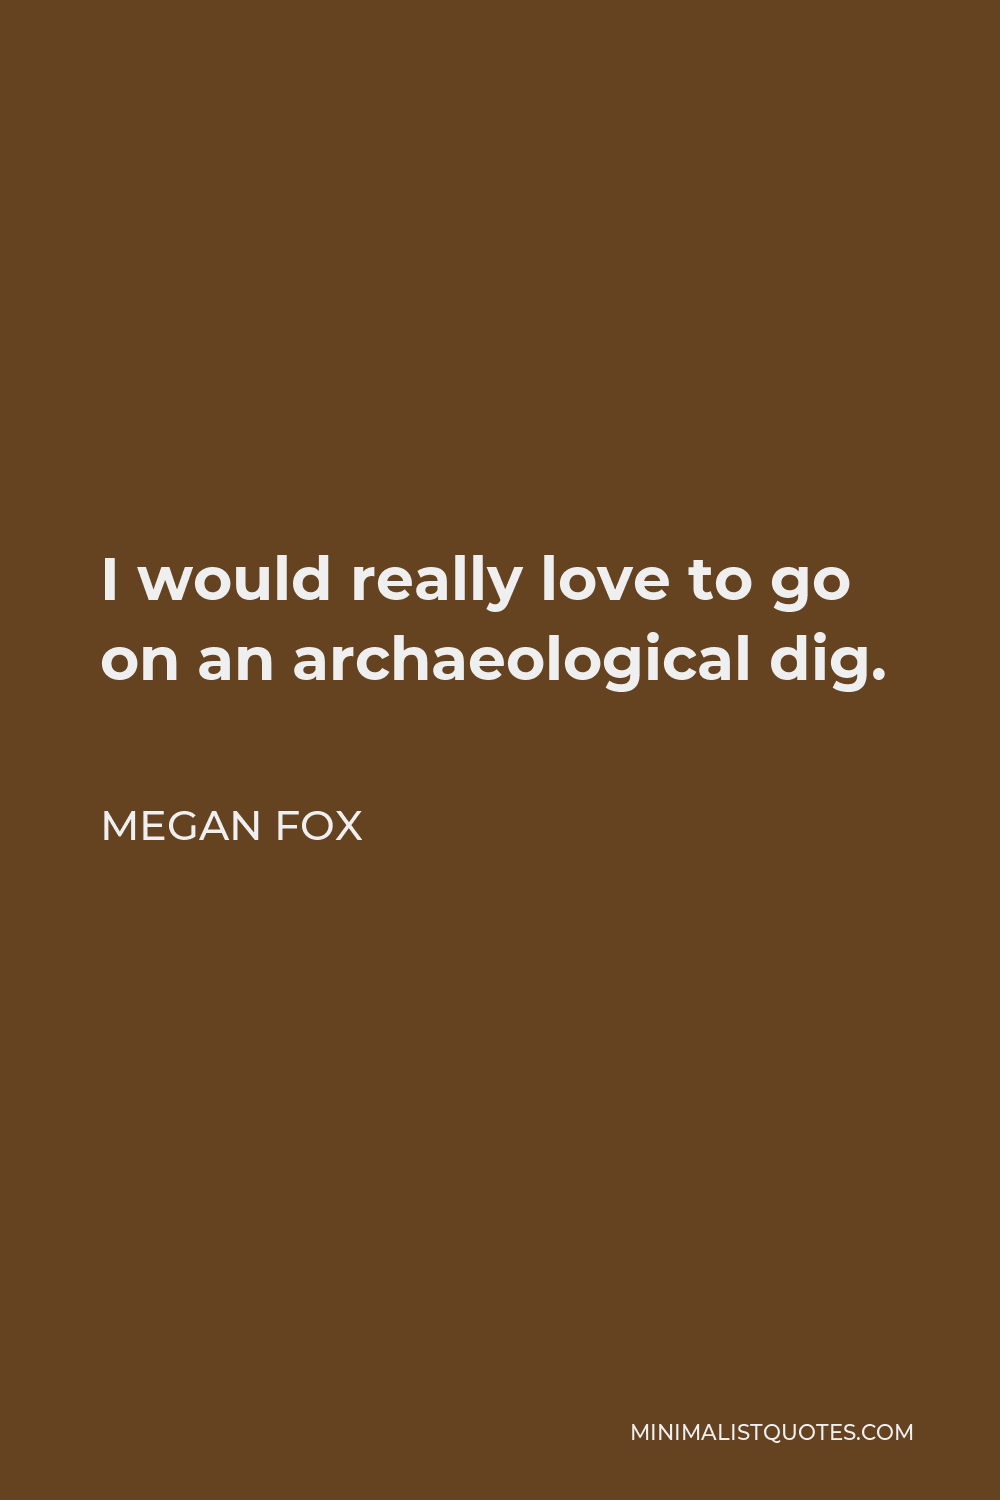 Megan Fox Quote - I would really love to go on an archaeological dig.